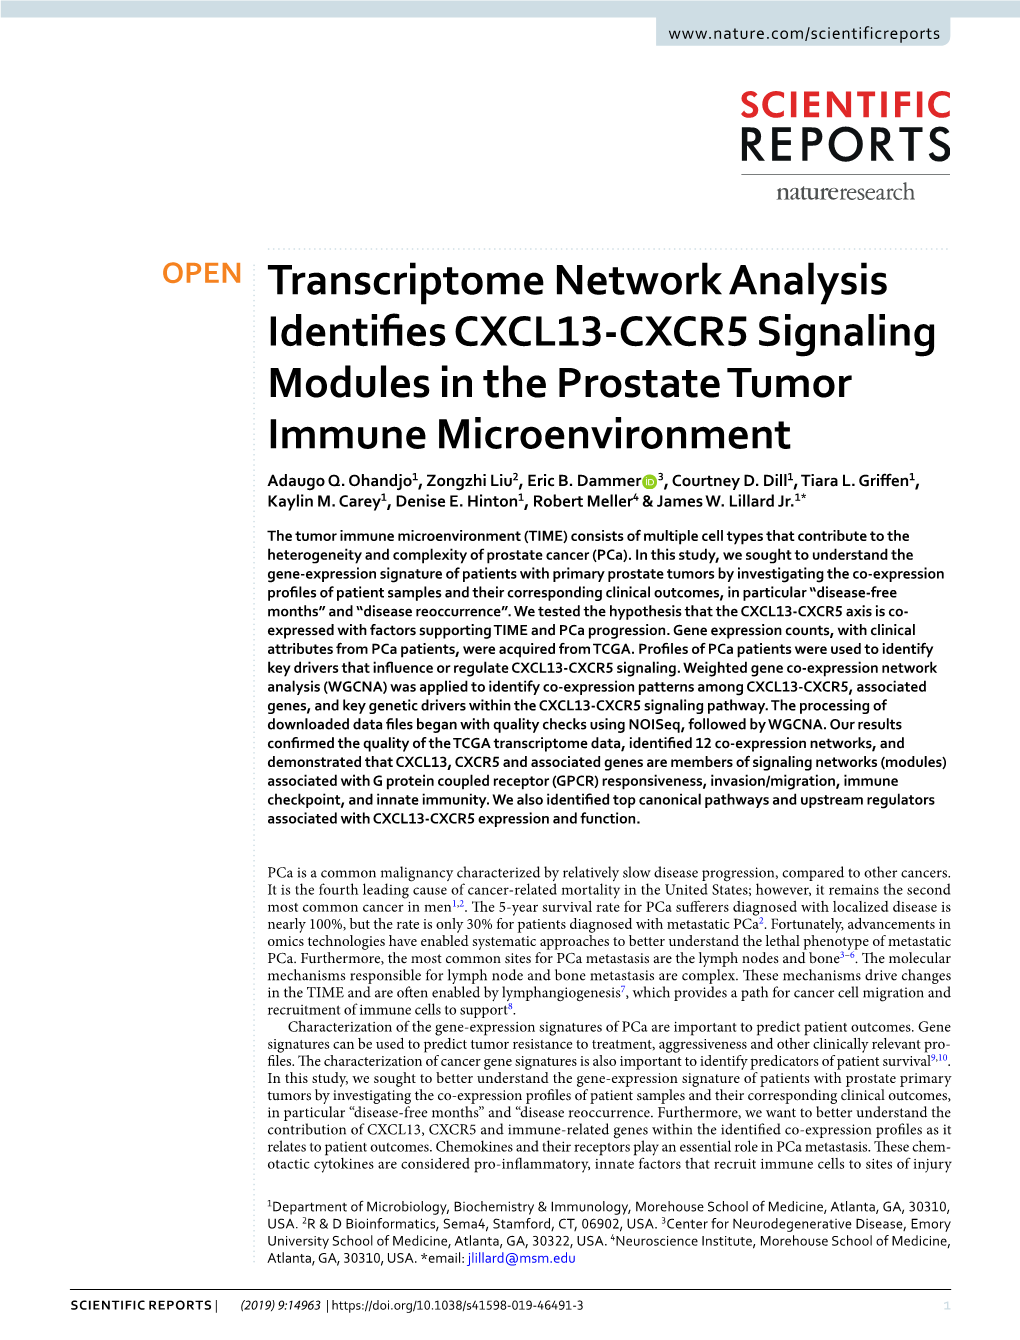 Transcriptome Network Analysis Identifies CXCL13-CXCR5 Signaling Modules in the Prostate Tumor Immune Microenvironment